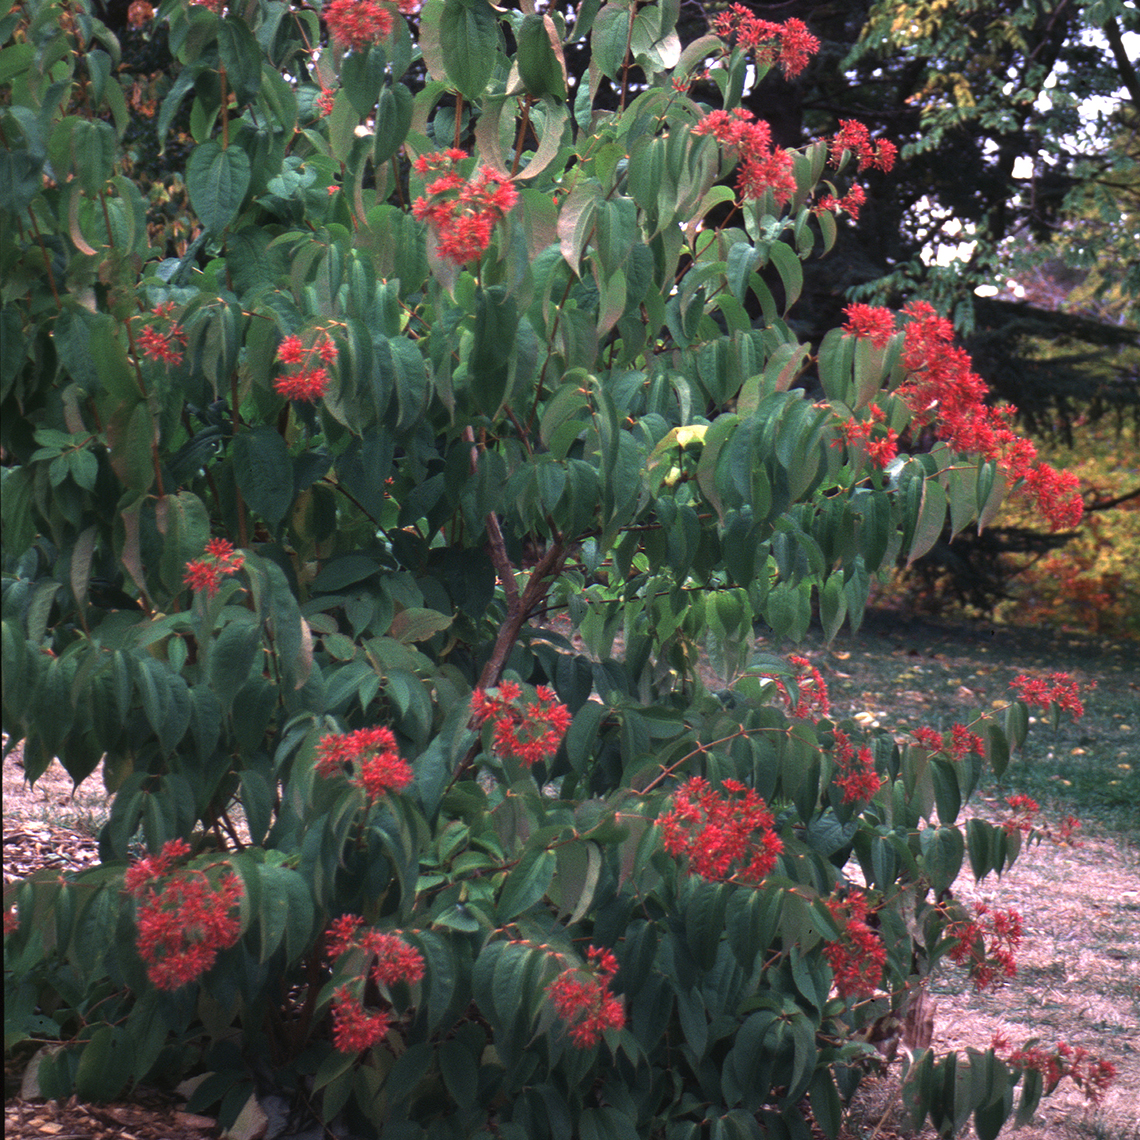 Heptacodium with red blooms in the landscape